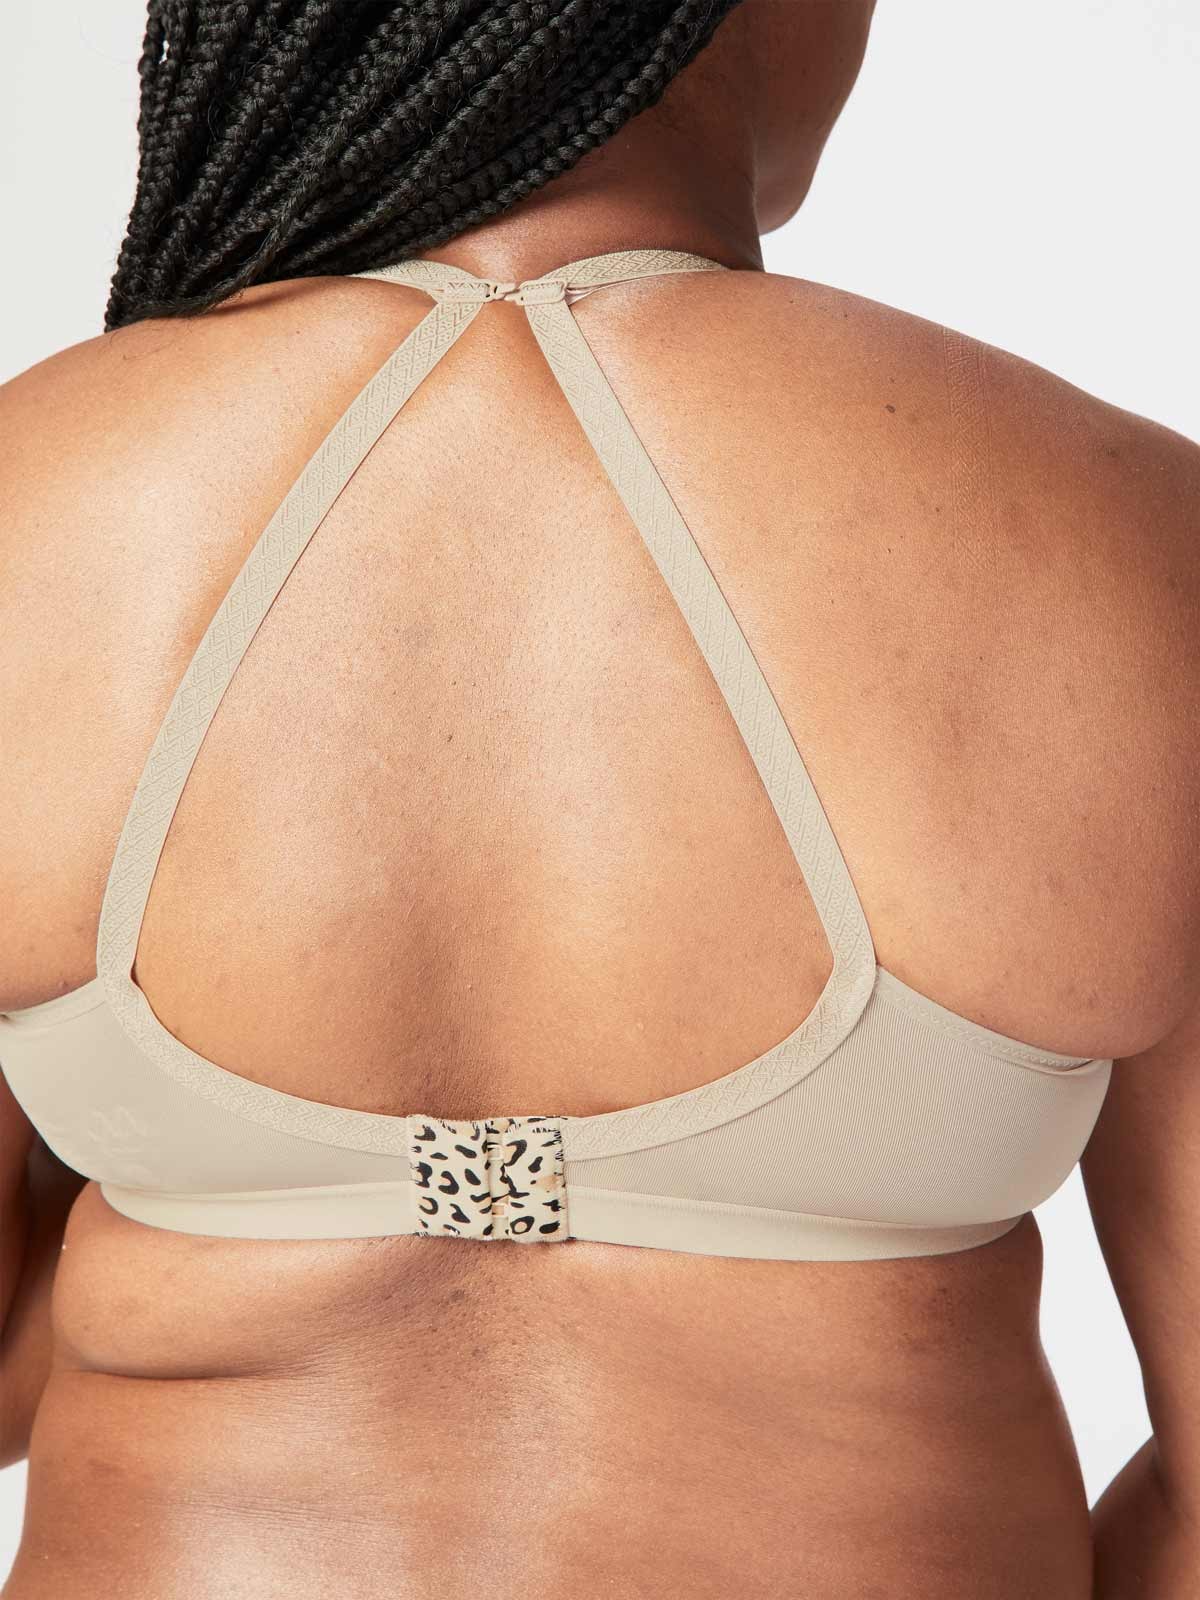 Jockey - On the lookout for the perfect nursing bra? Look